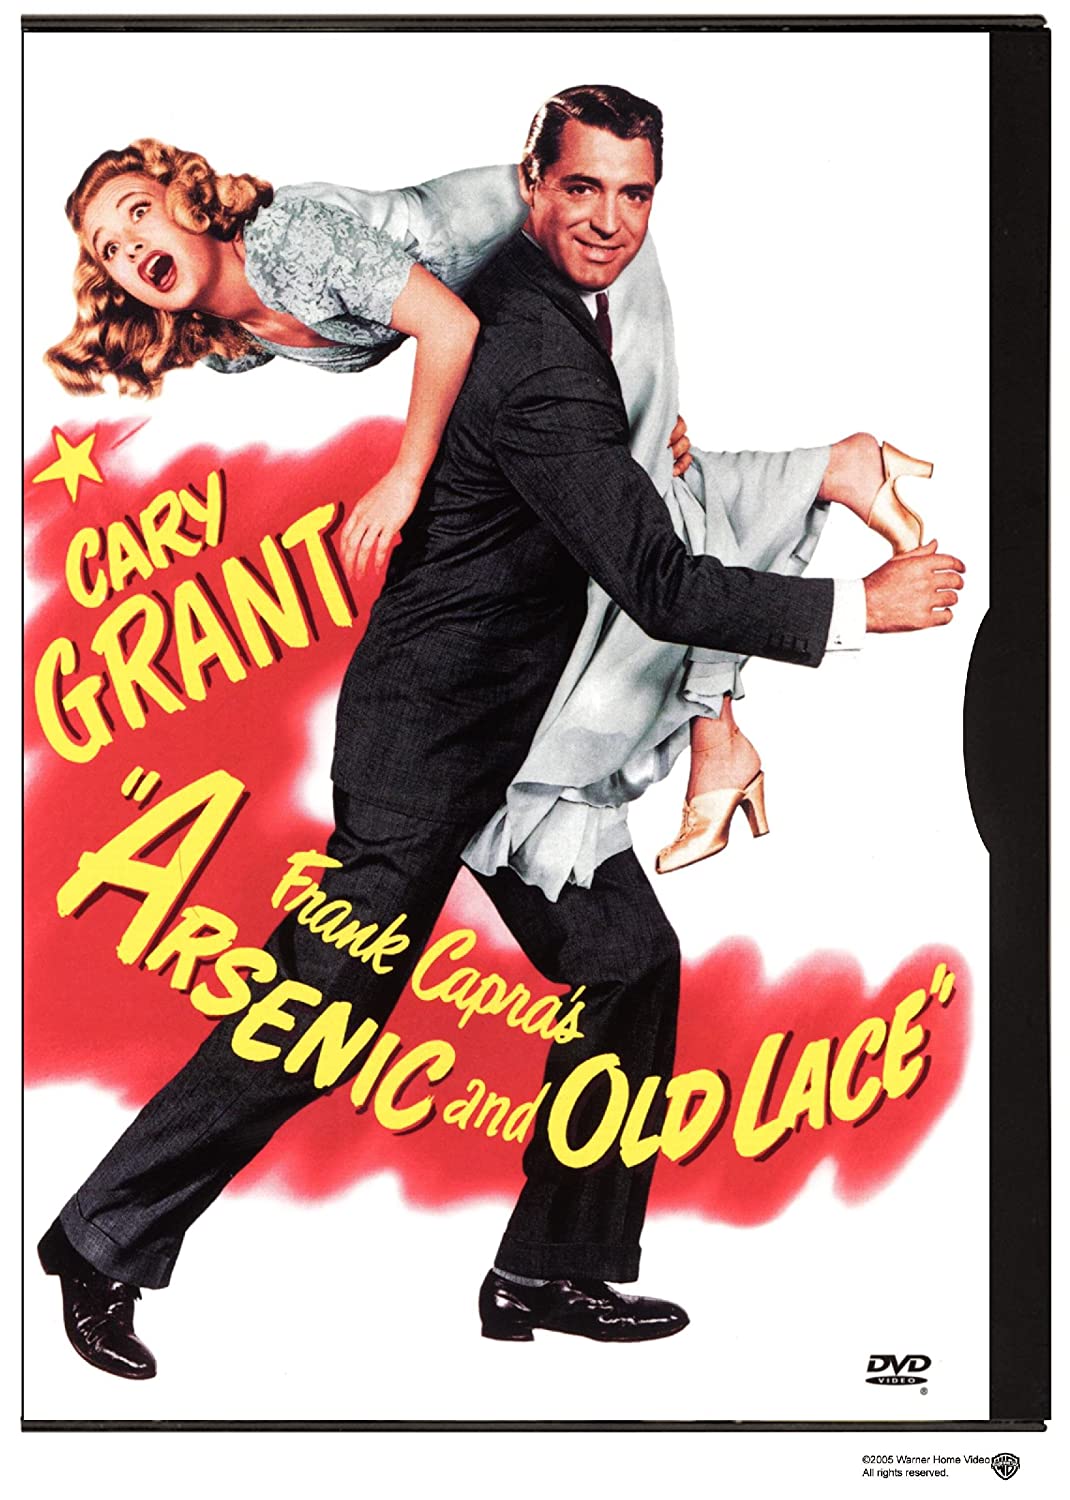 Arsenic and Old Lace (1944) starring Cary Grant, Raymond Massey, Peter Lorre